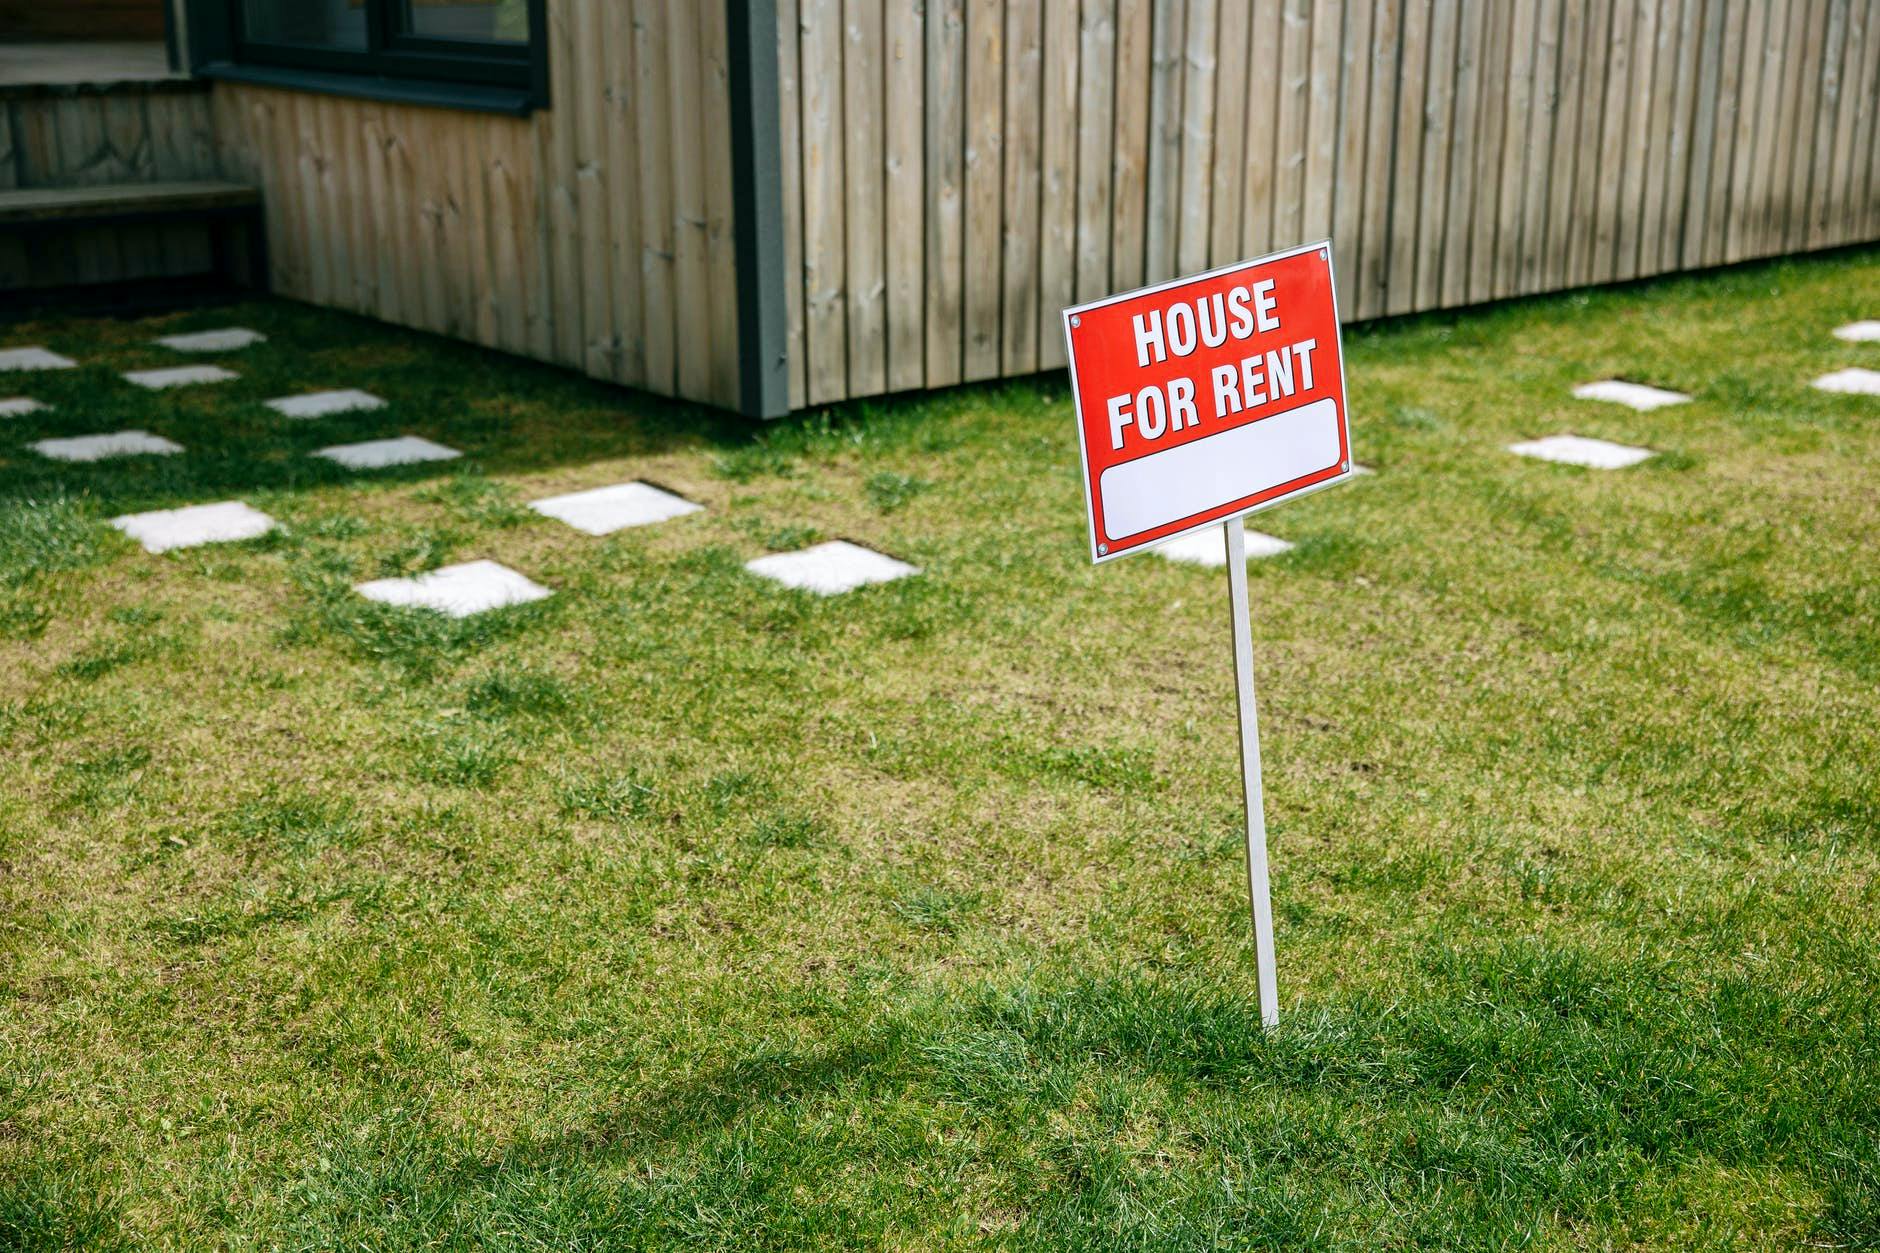 red and white sign board on the lawn grass